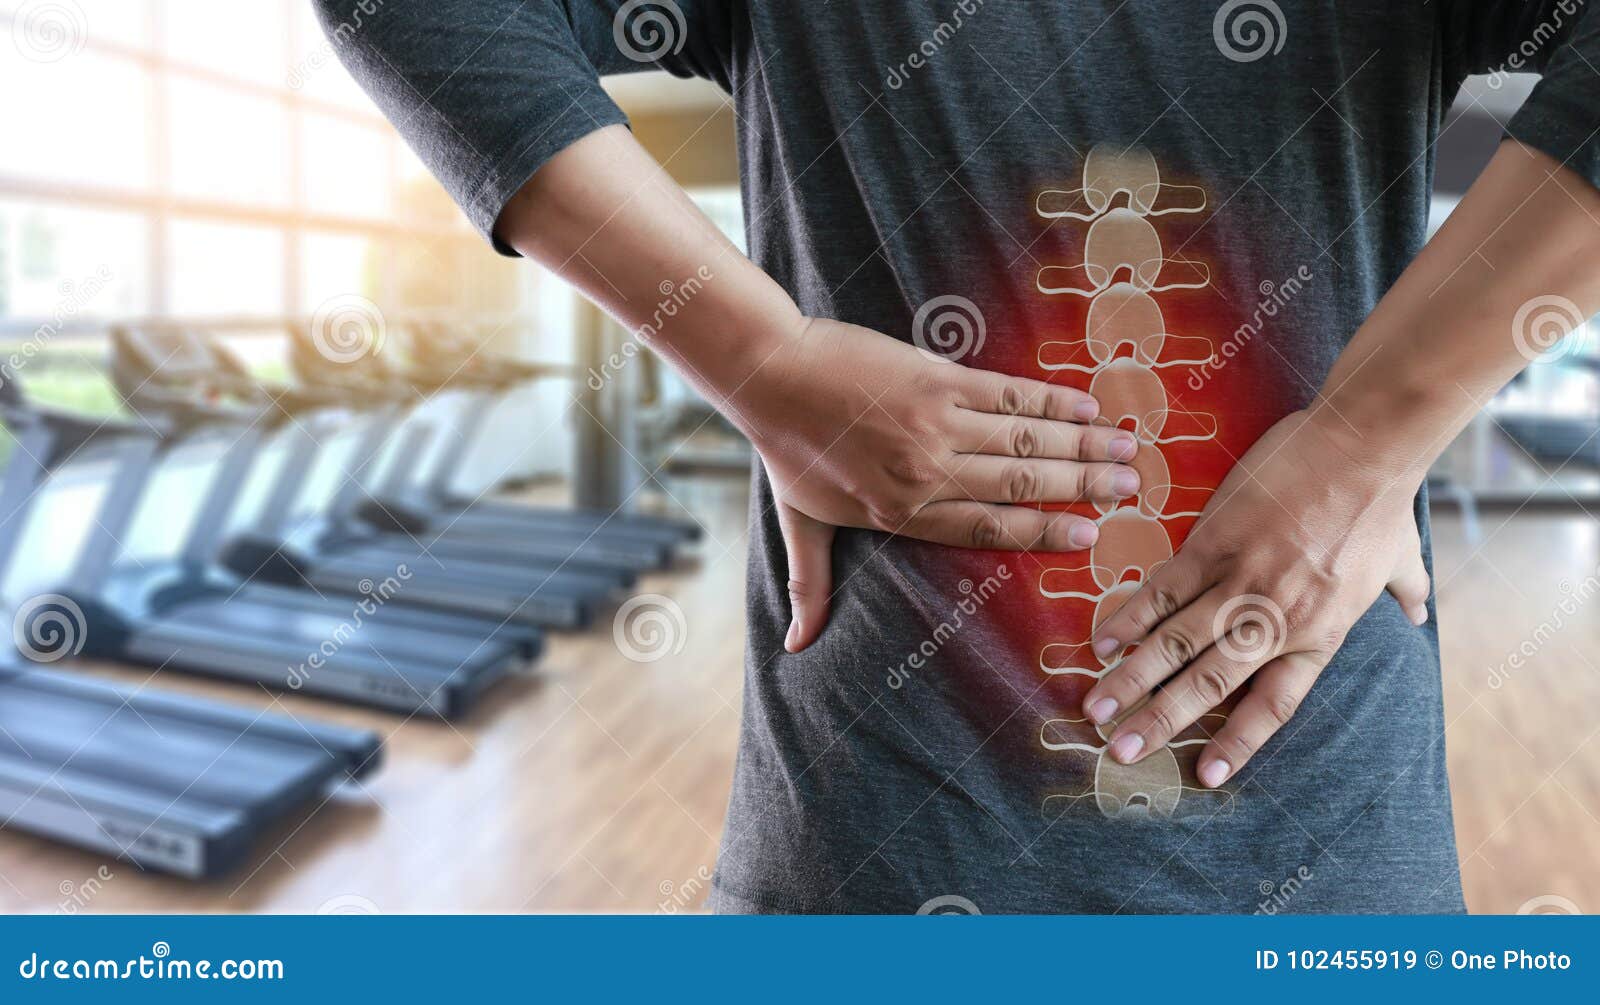 young man feeling suffering lower back pain pain relief concep